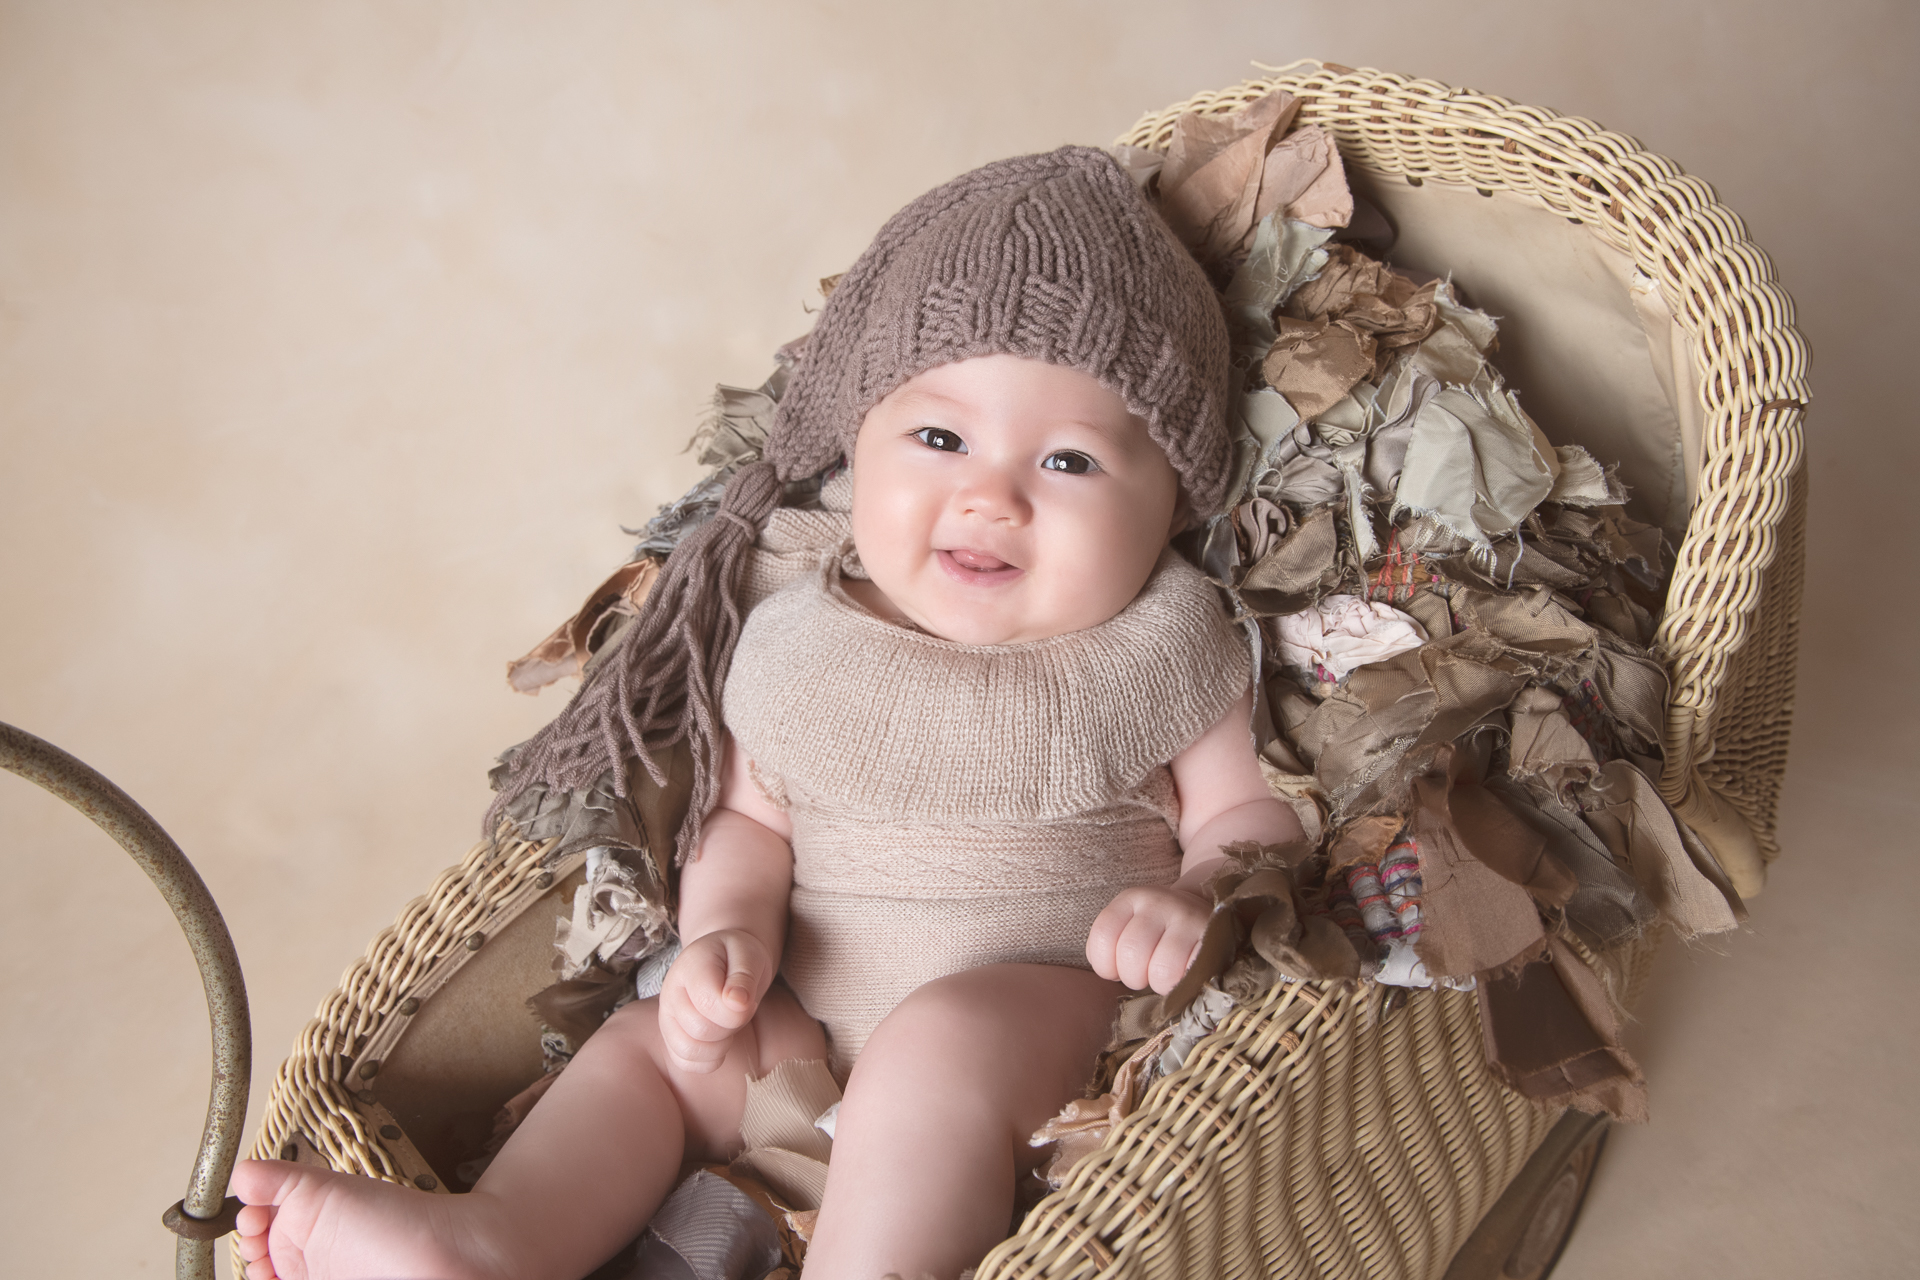 Six month old baby wearing brown hat resting on a decorating old fashion stroller smiles at the camera. Light brown backdrop